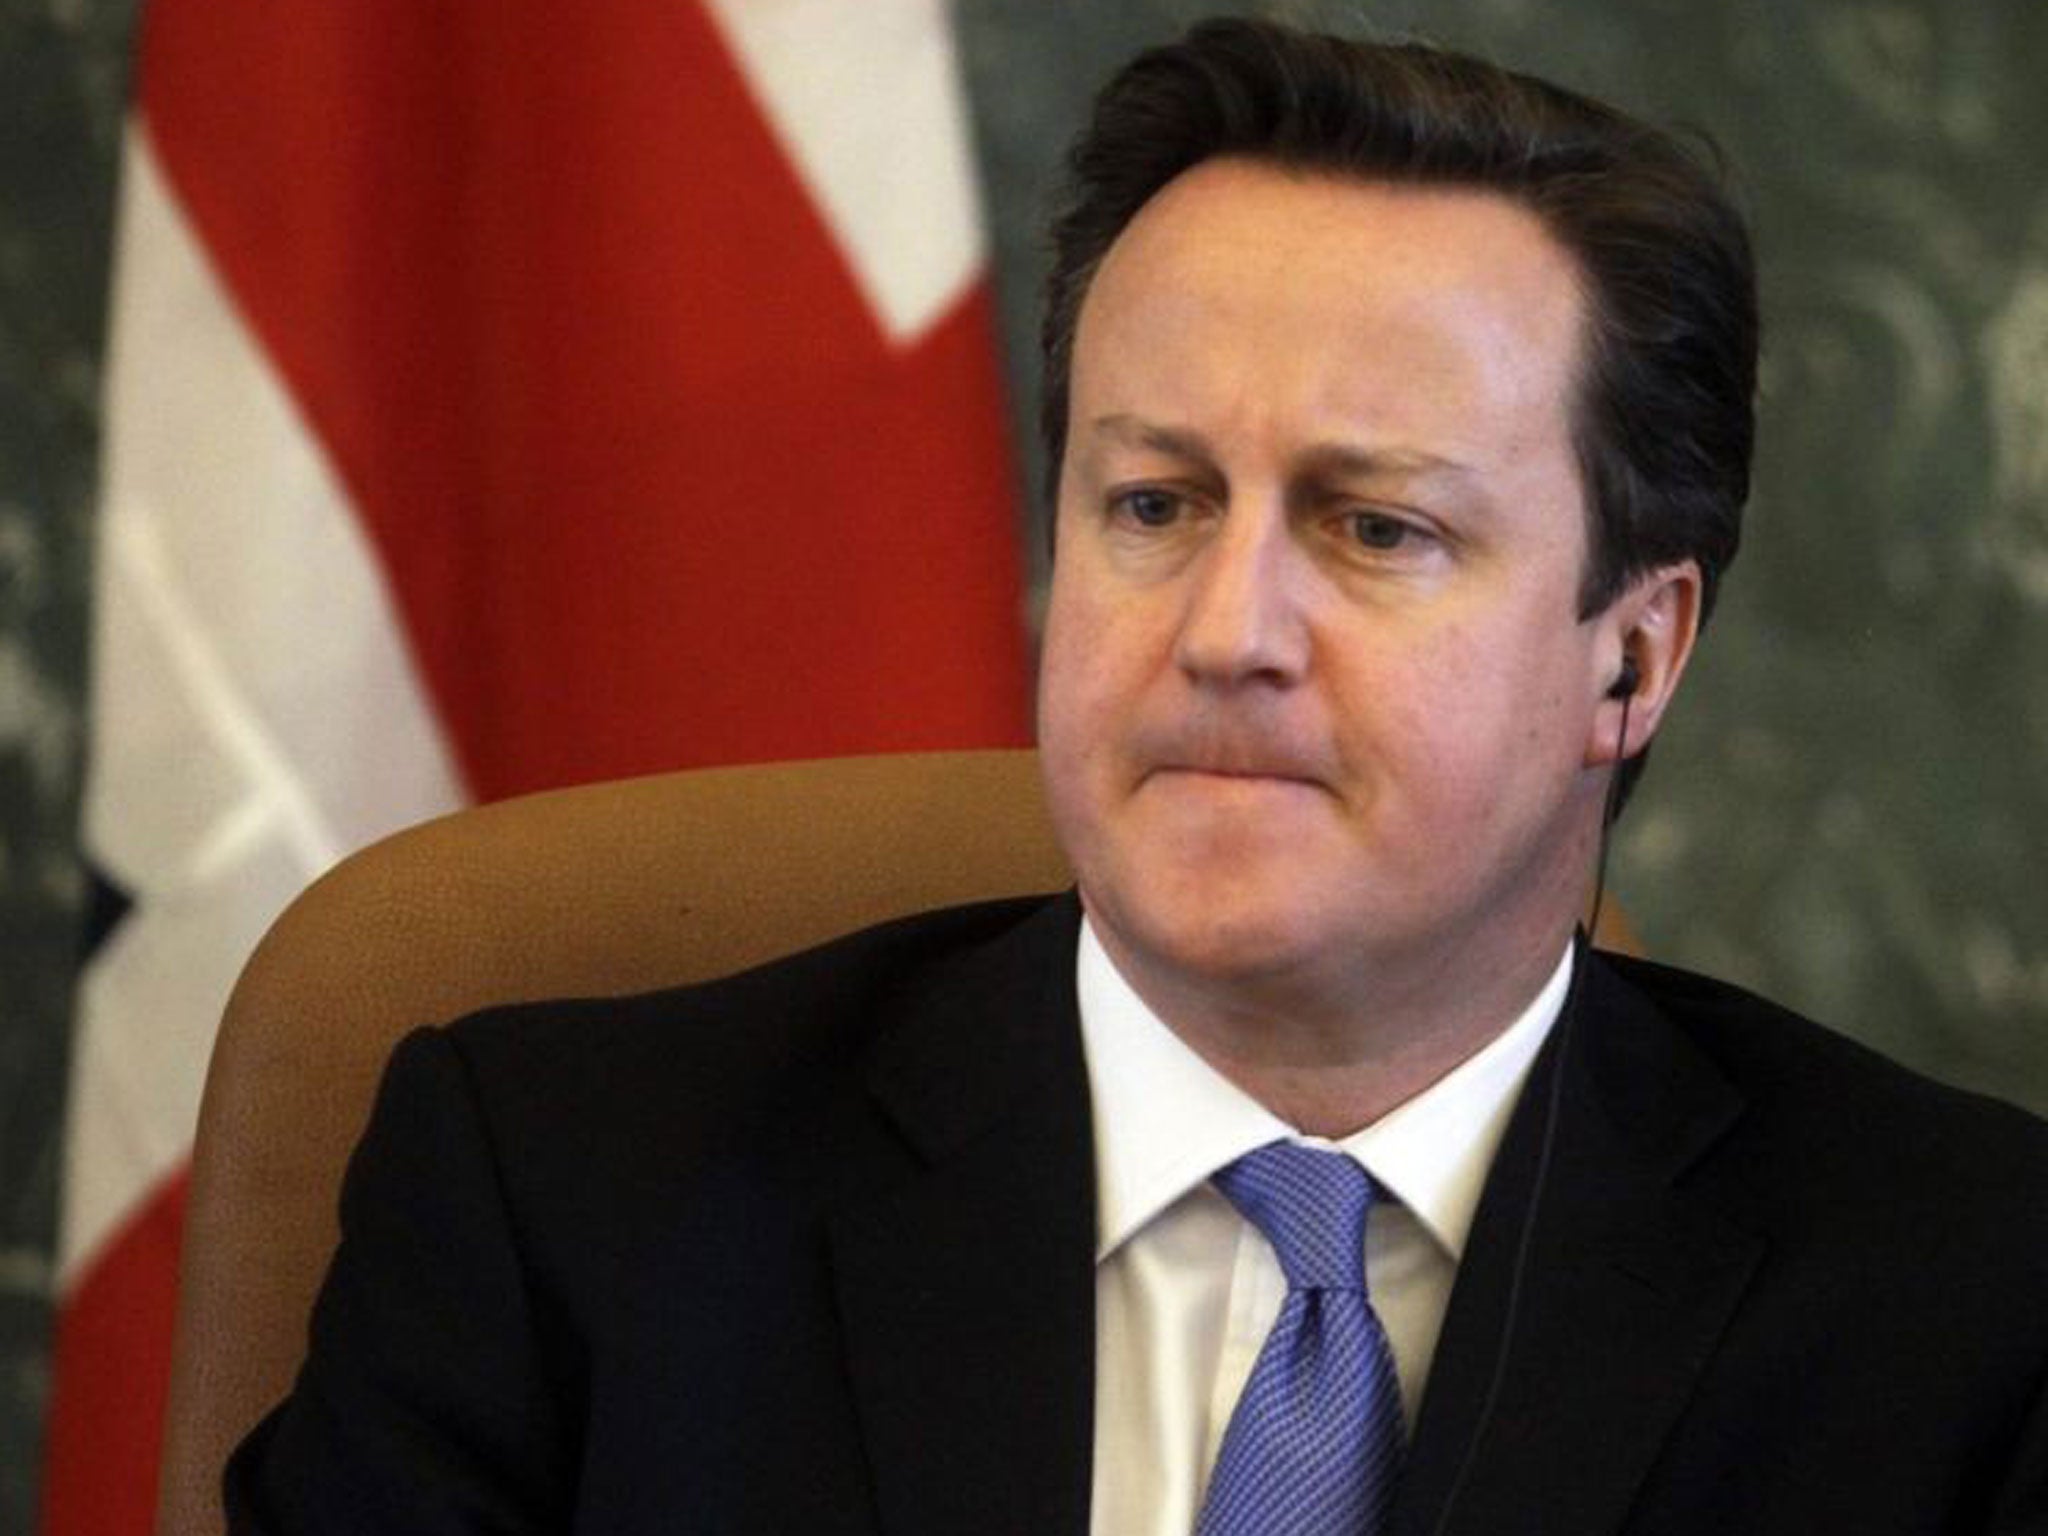 Boris Johnson today stepped up the pressure on David Cameron (pictured) over Europe